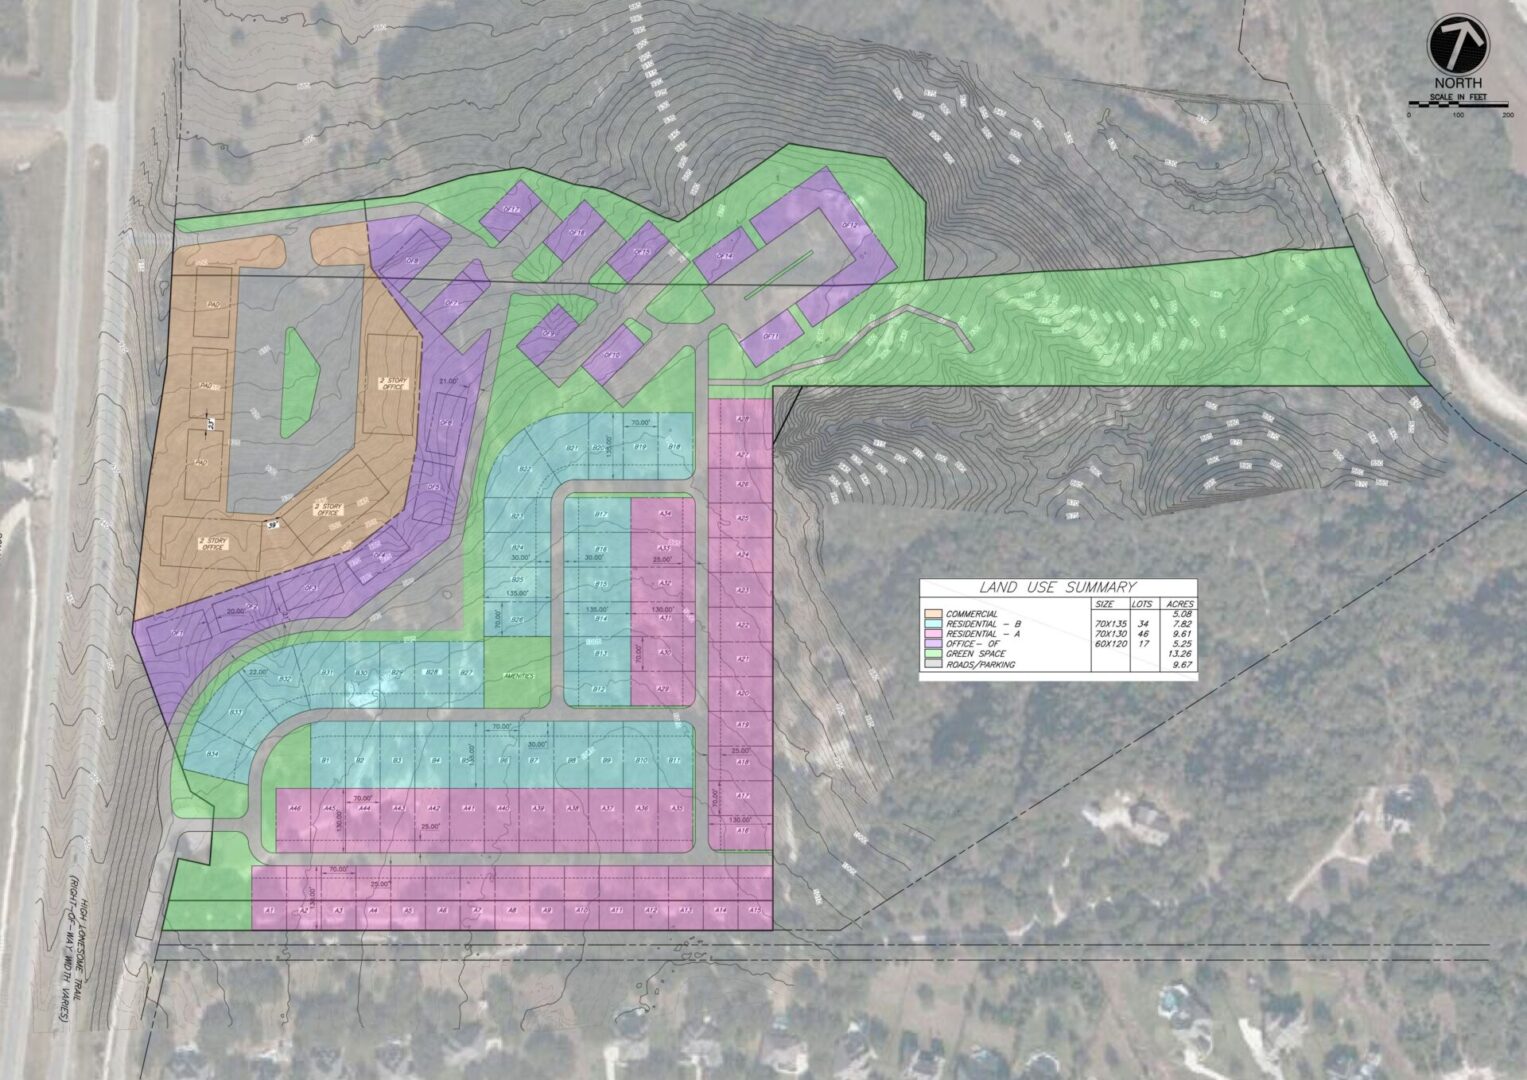 A map of the area where the proposed development is located.